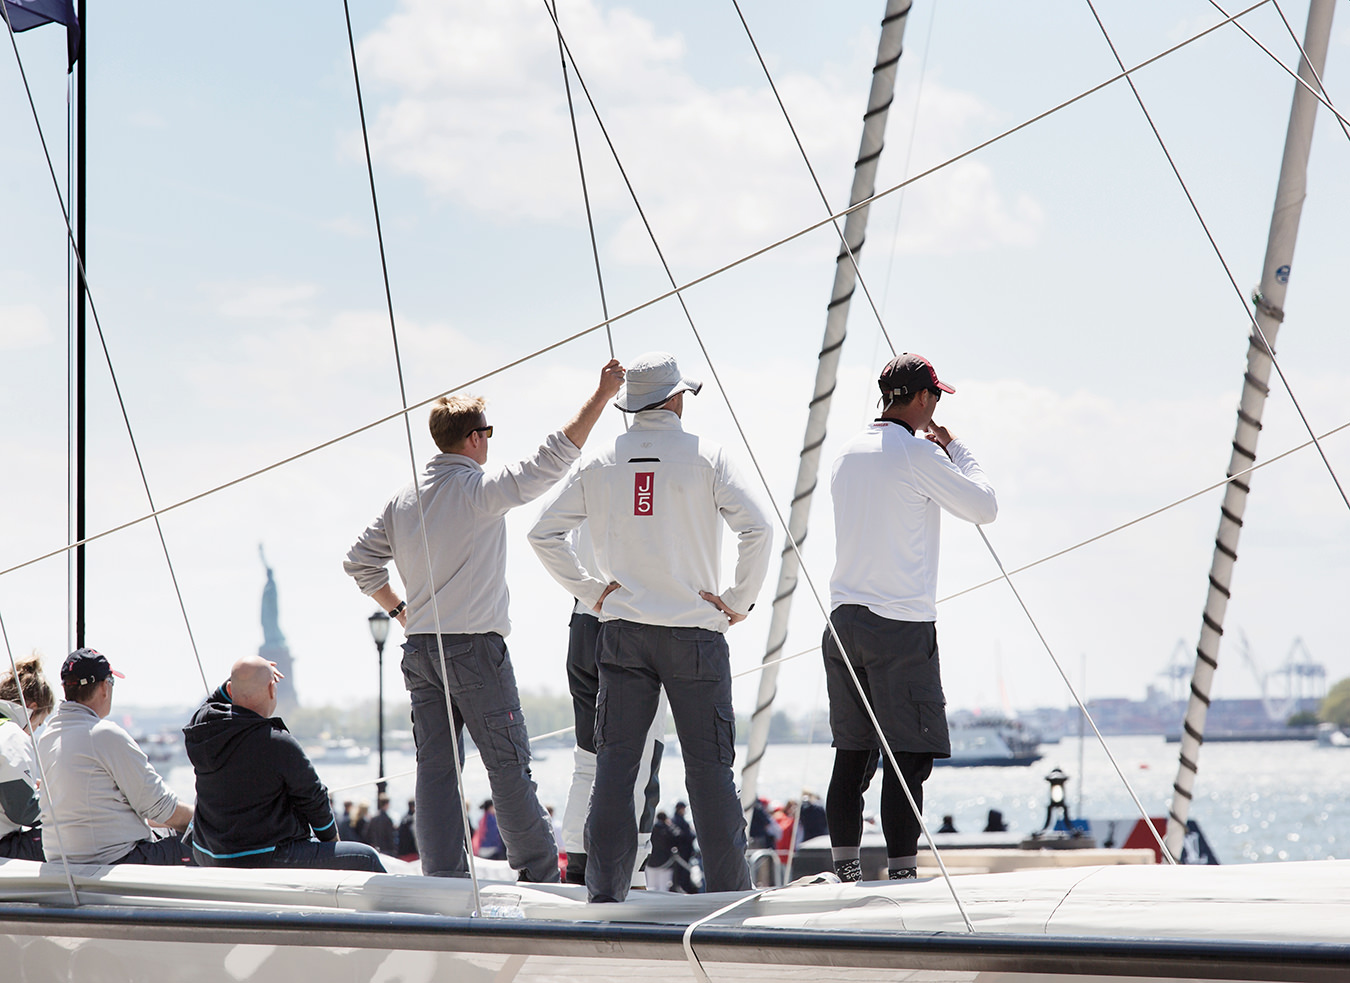 THE FIRST LOUIS VUITTON AMERICA'S CUP WORLD SERIES - News